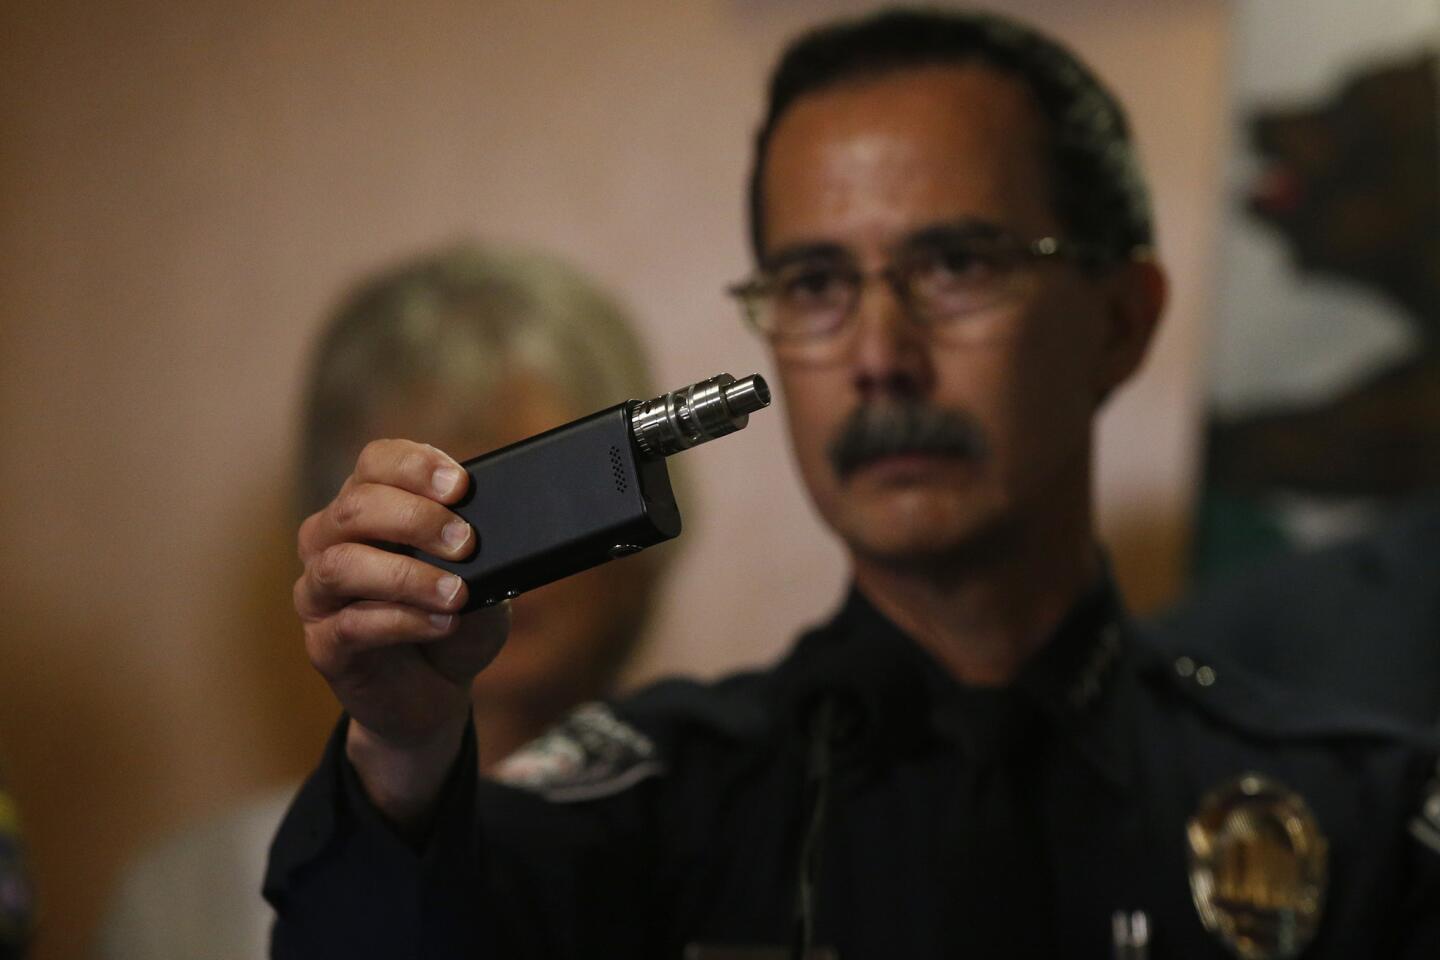 El Cajon Police Chief Jeff Davis holds a vaping device similar to the one that victim Alfred Olango was holding in the video.